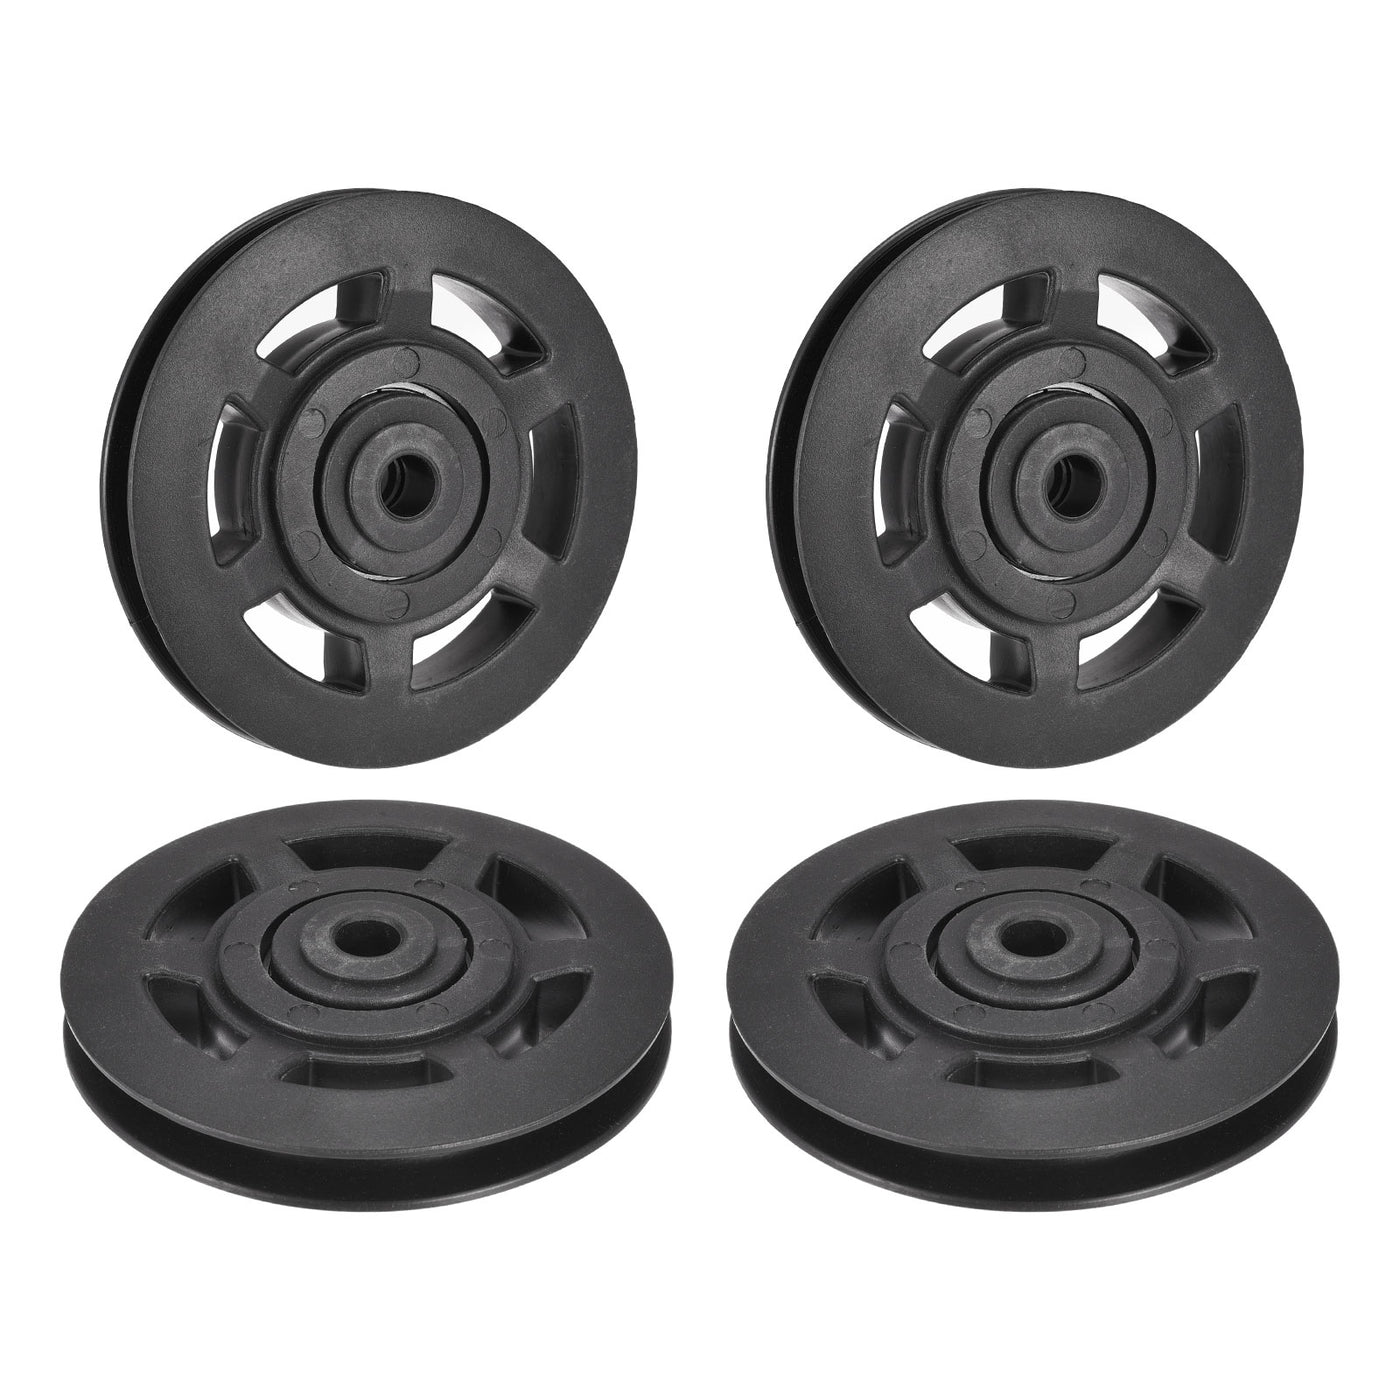 uxcell Uxcell 4pcs 96mm Bearing Pulley Wheel Cable Fitness Equipment Accessories